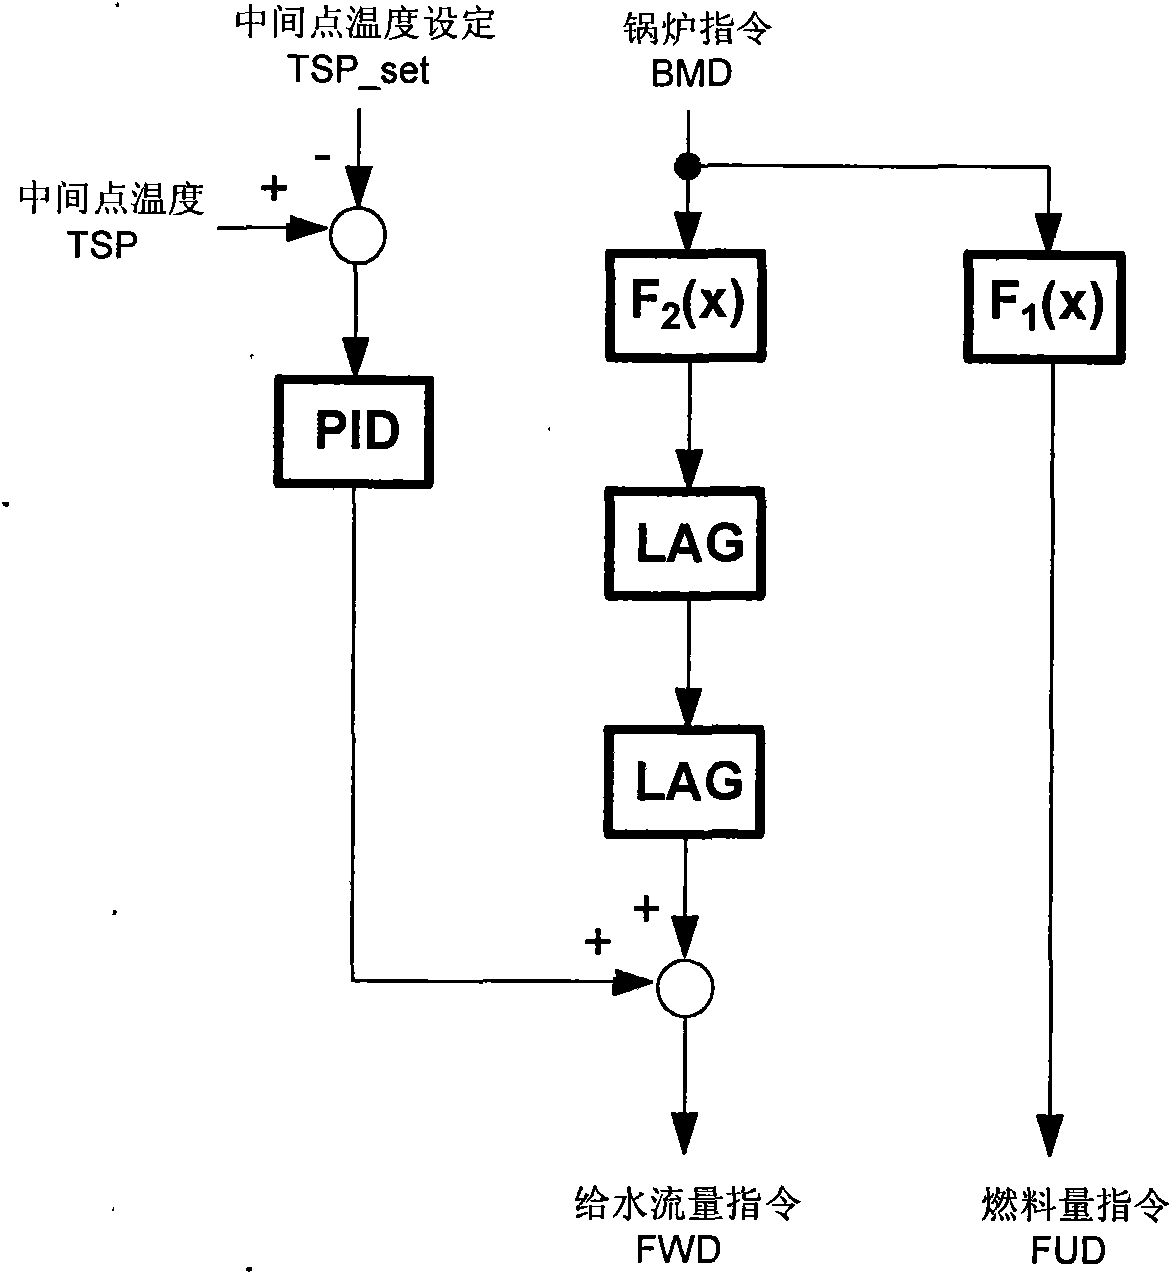 Fuel-water ratio control method for supercritical and ultra supercritical unit